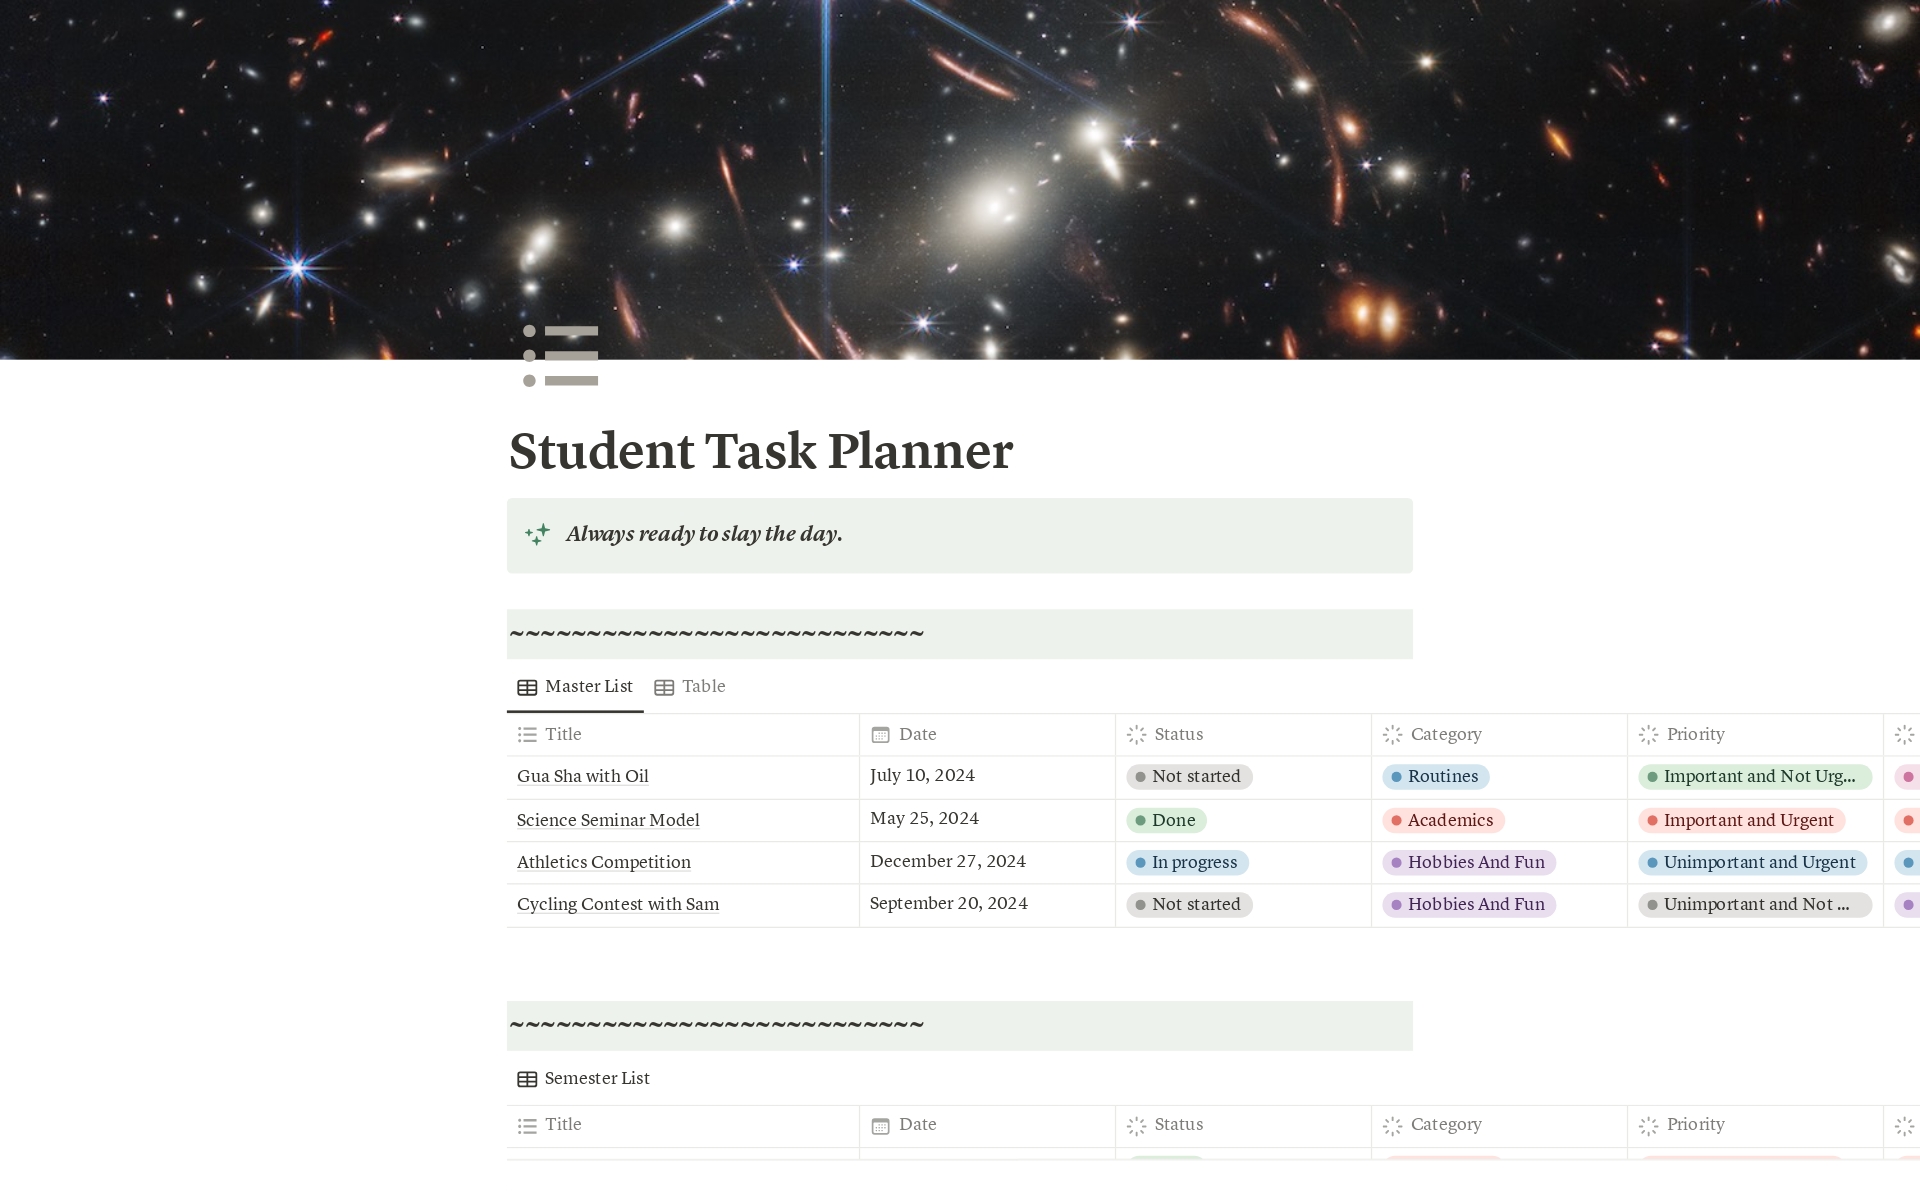 Student Task Planner Template for Notion:
Achieve academic success with our comprehensive Student Task Planner Template for Notion. Designed to streamline your study routine, this all-in-one tool helps you manage your assignments, exams, and extracurricular activities in one go. 